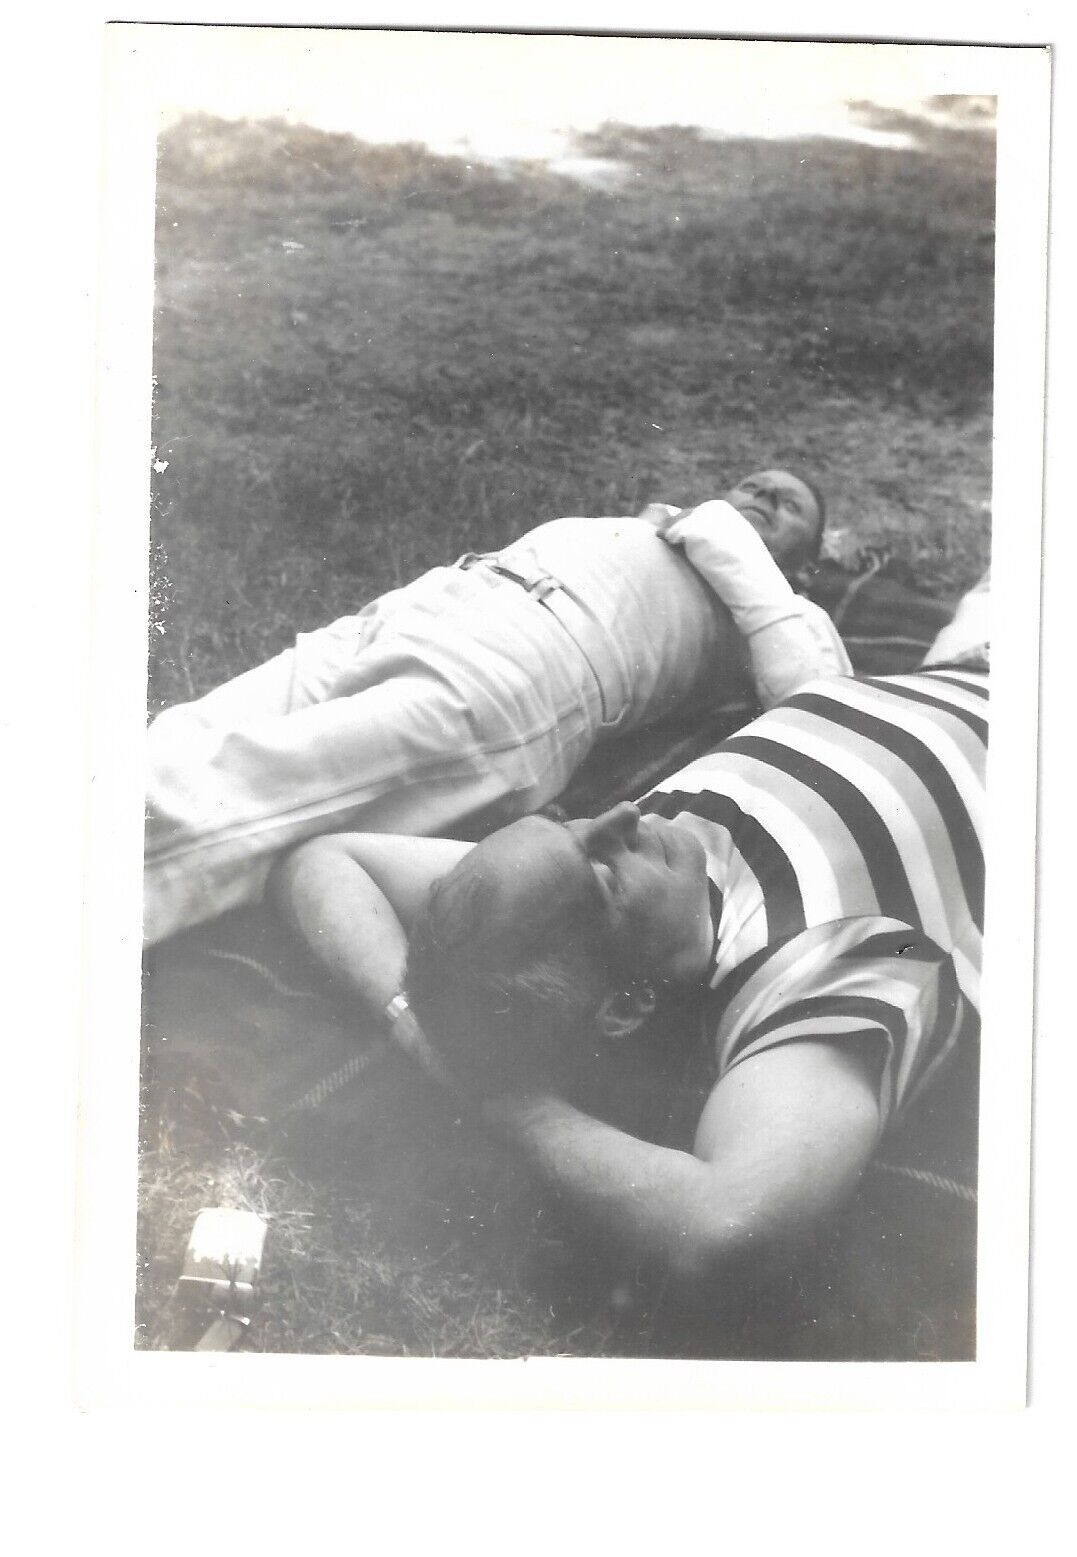 VTG PHOTO Two Handsome Guys Nap on Grass Striped Shirt Affectionate Men Gay Int.